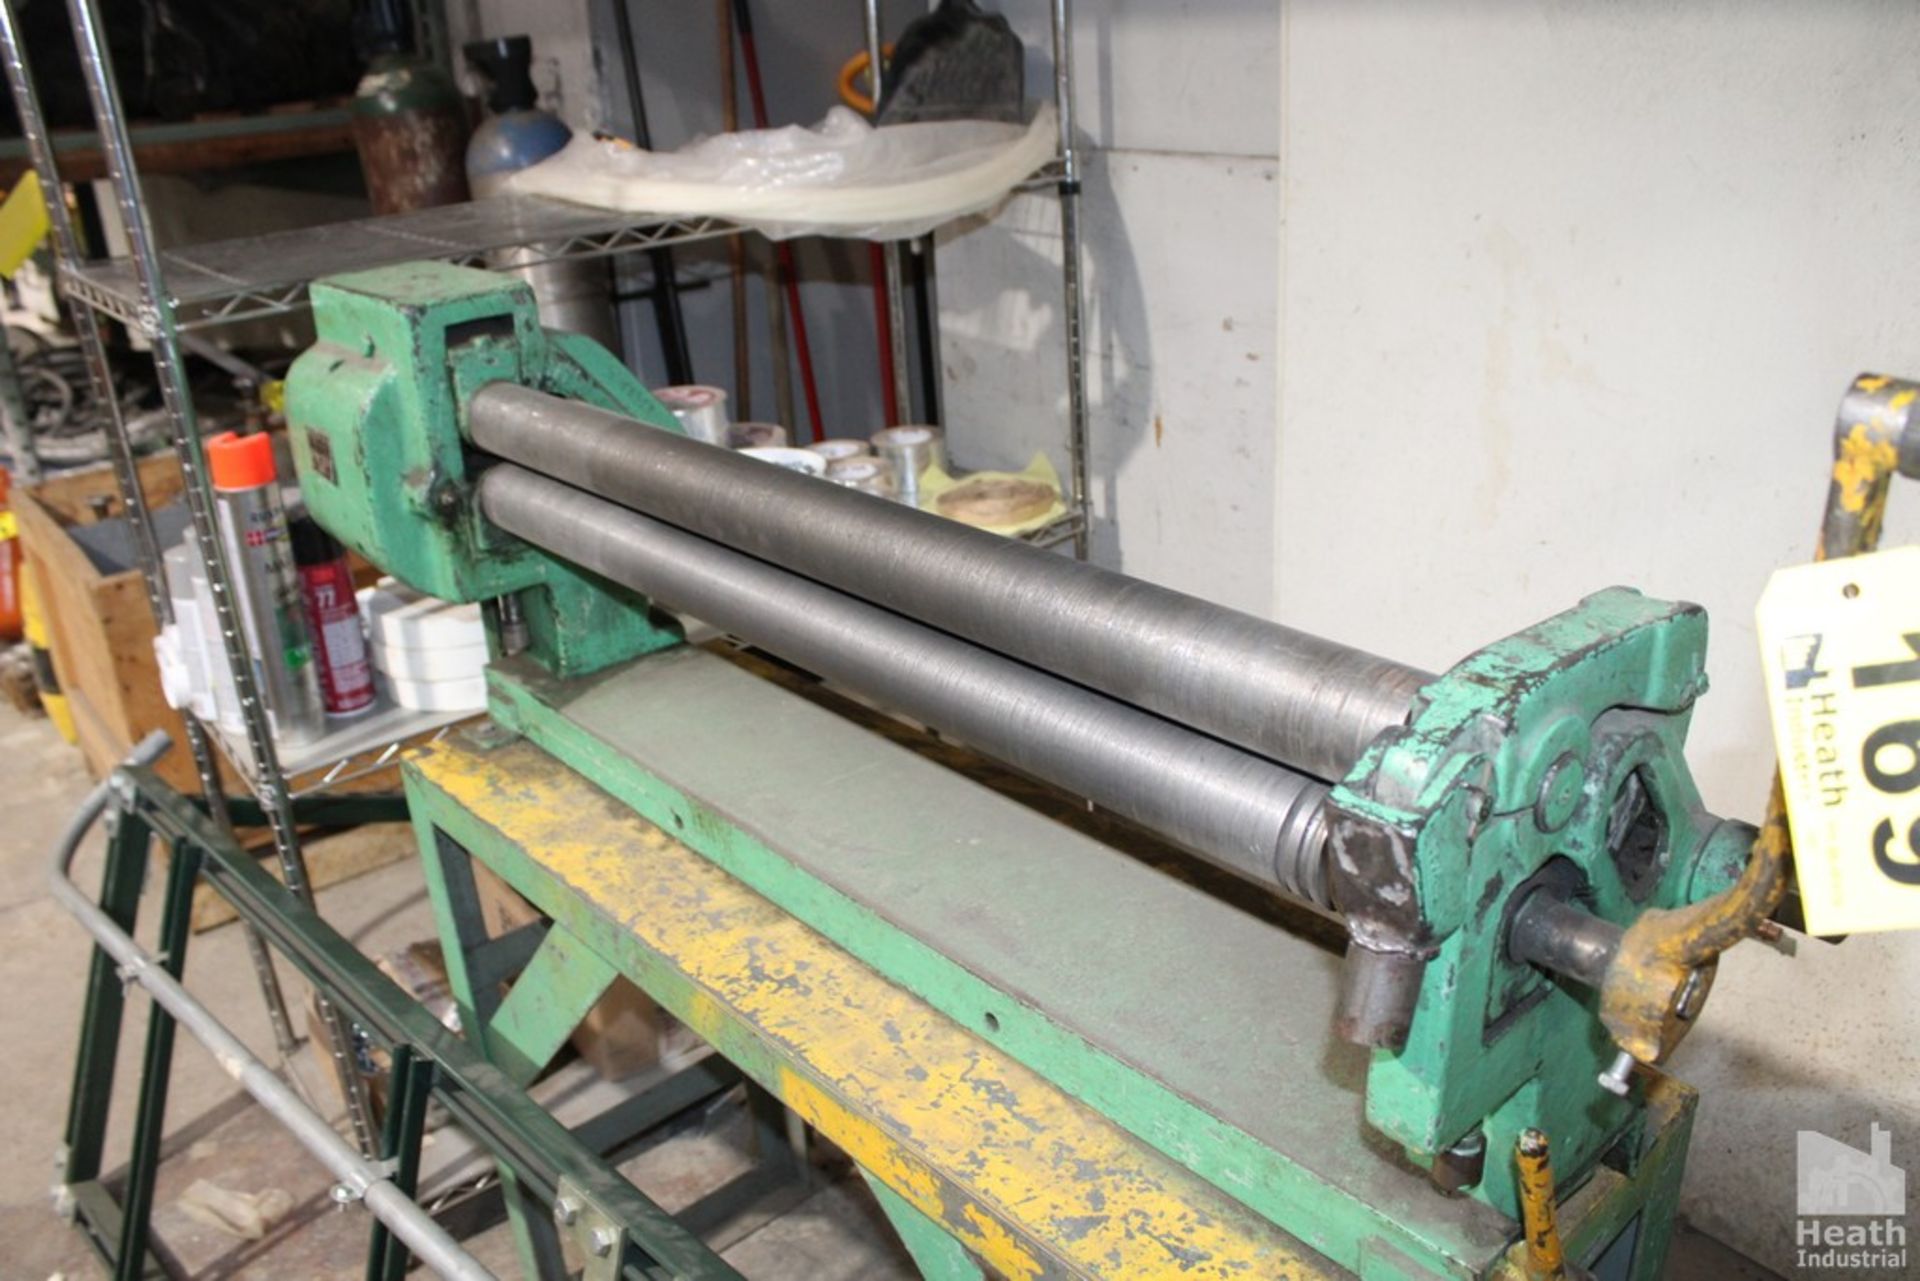 PEXTO 16 GAUGE X 36” MODEL 390-1 BENDING ROLL, S/N 5/57 WITH STAND - Image 4 of 4